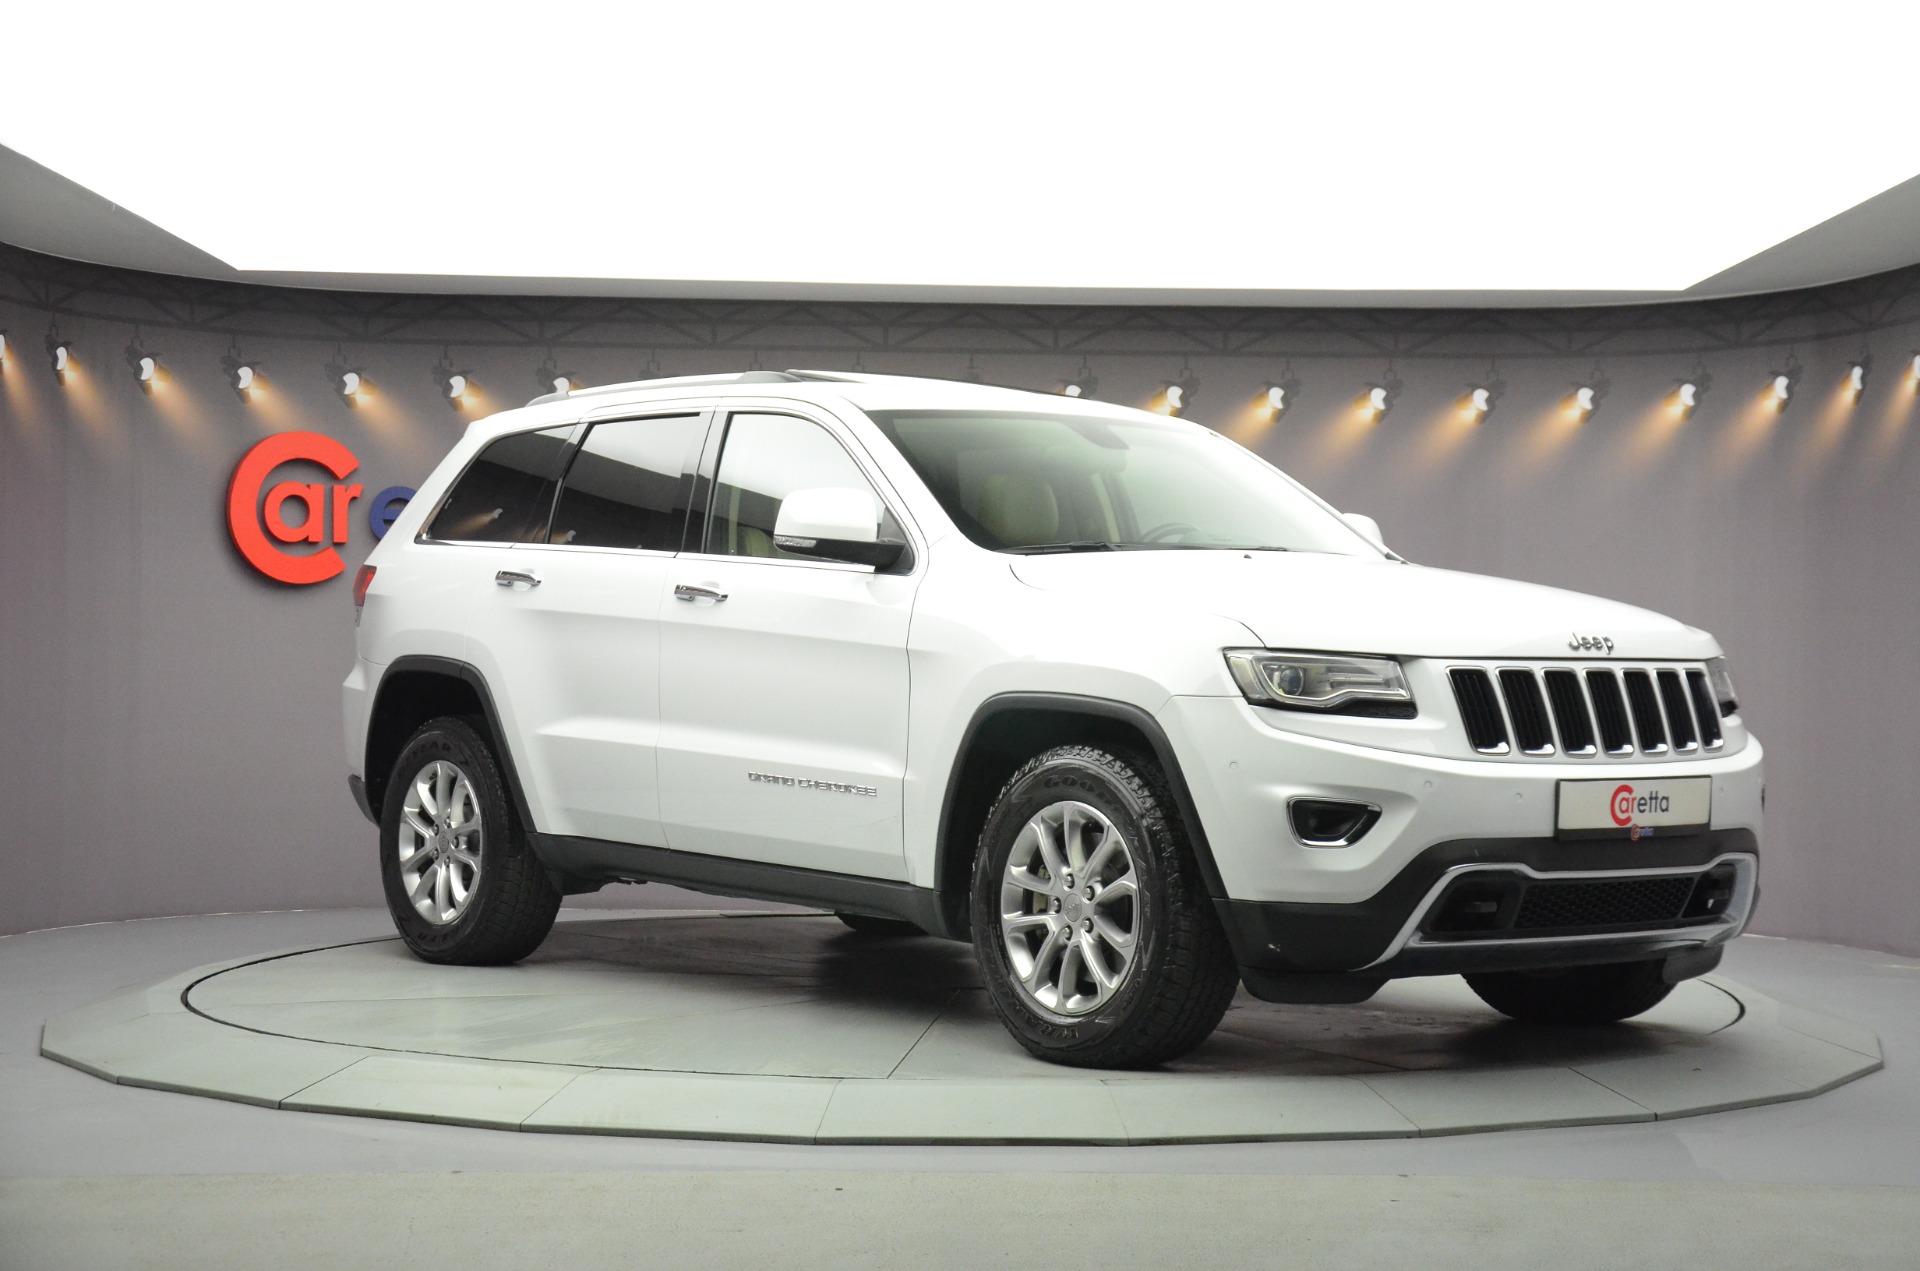 2013 Model Jeep Grand Cherokee 3.0 CRD V6 Limited-2